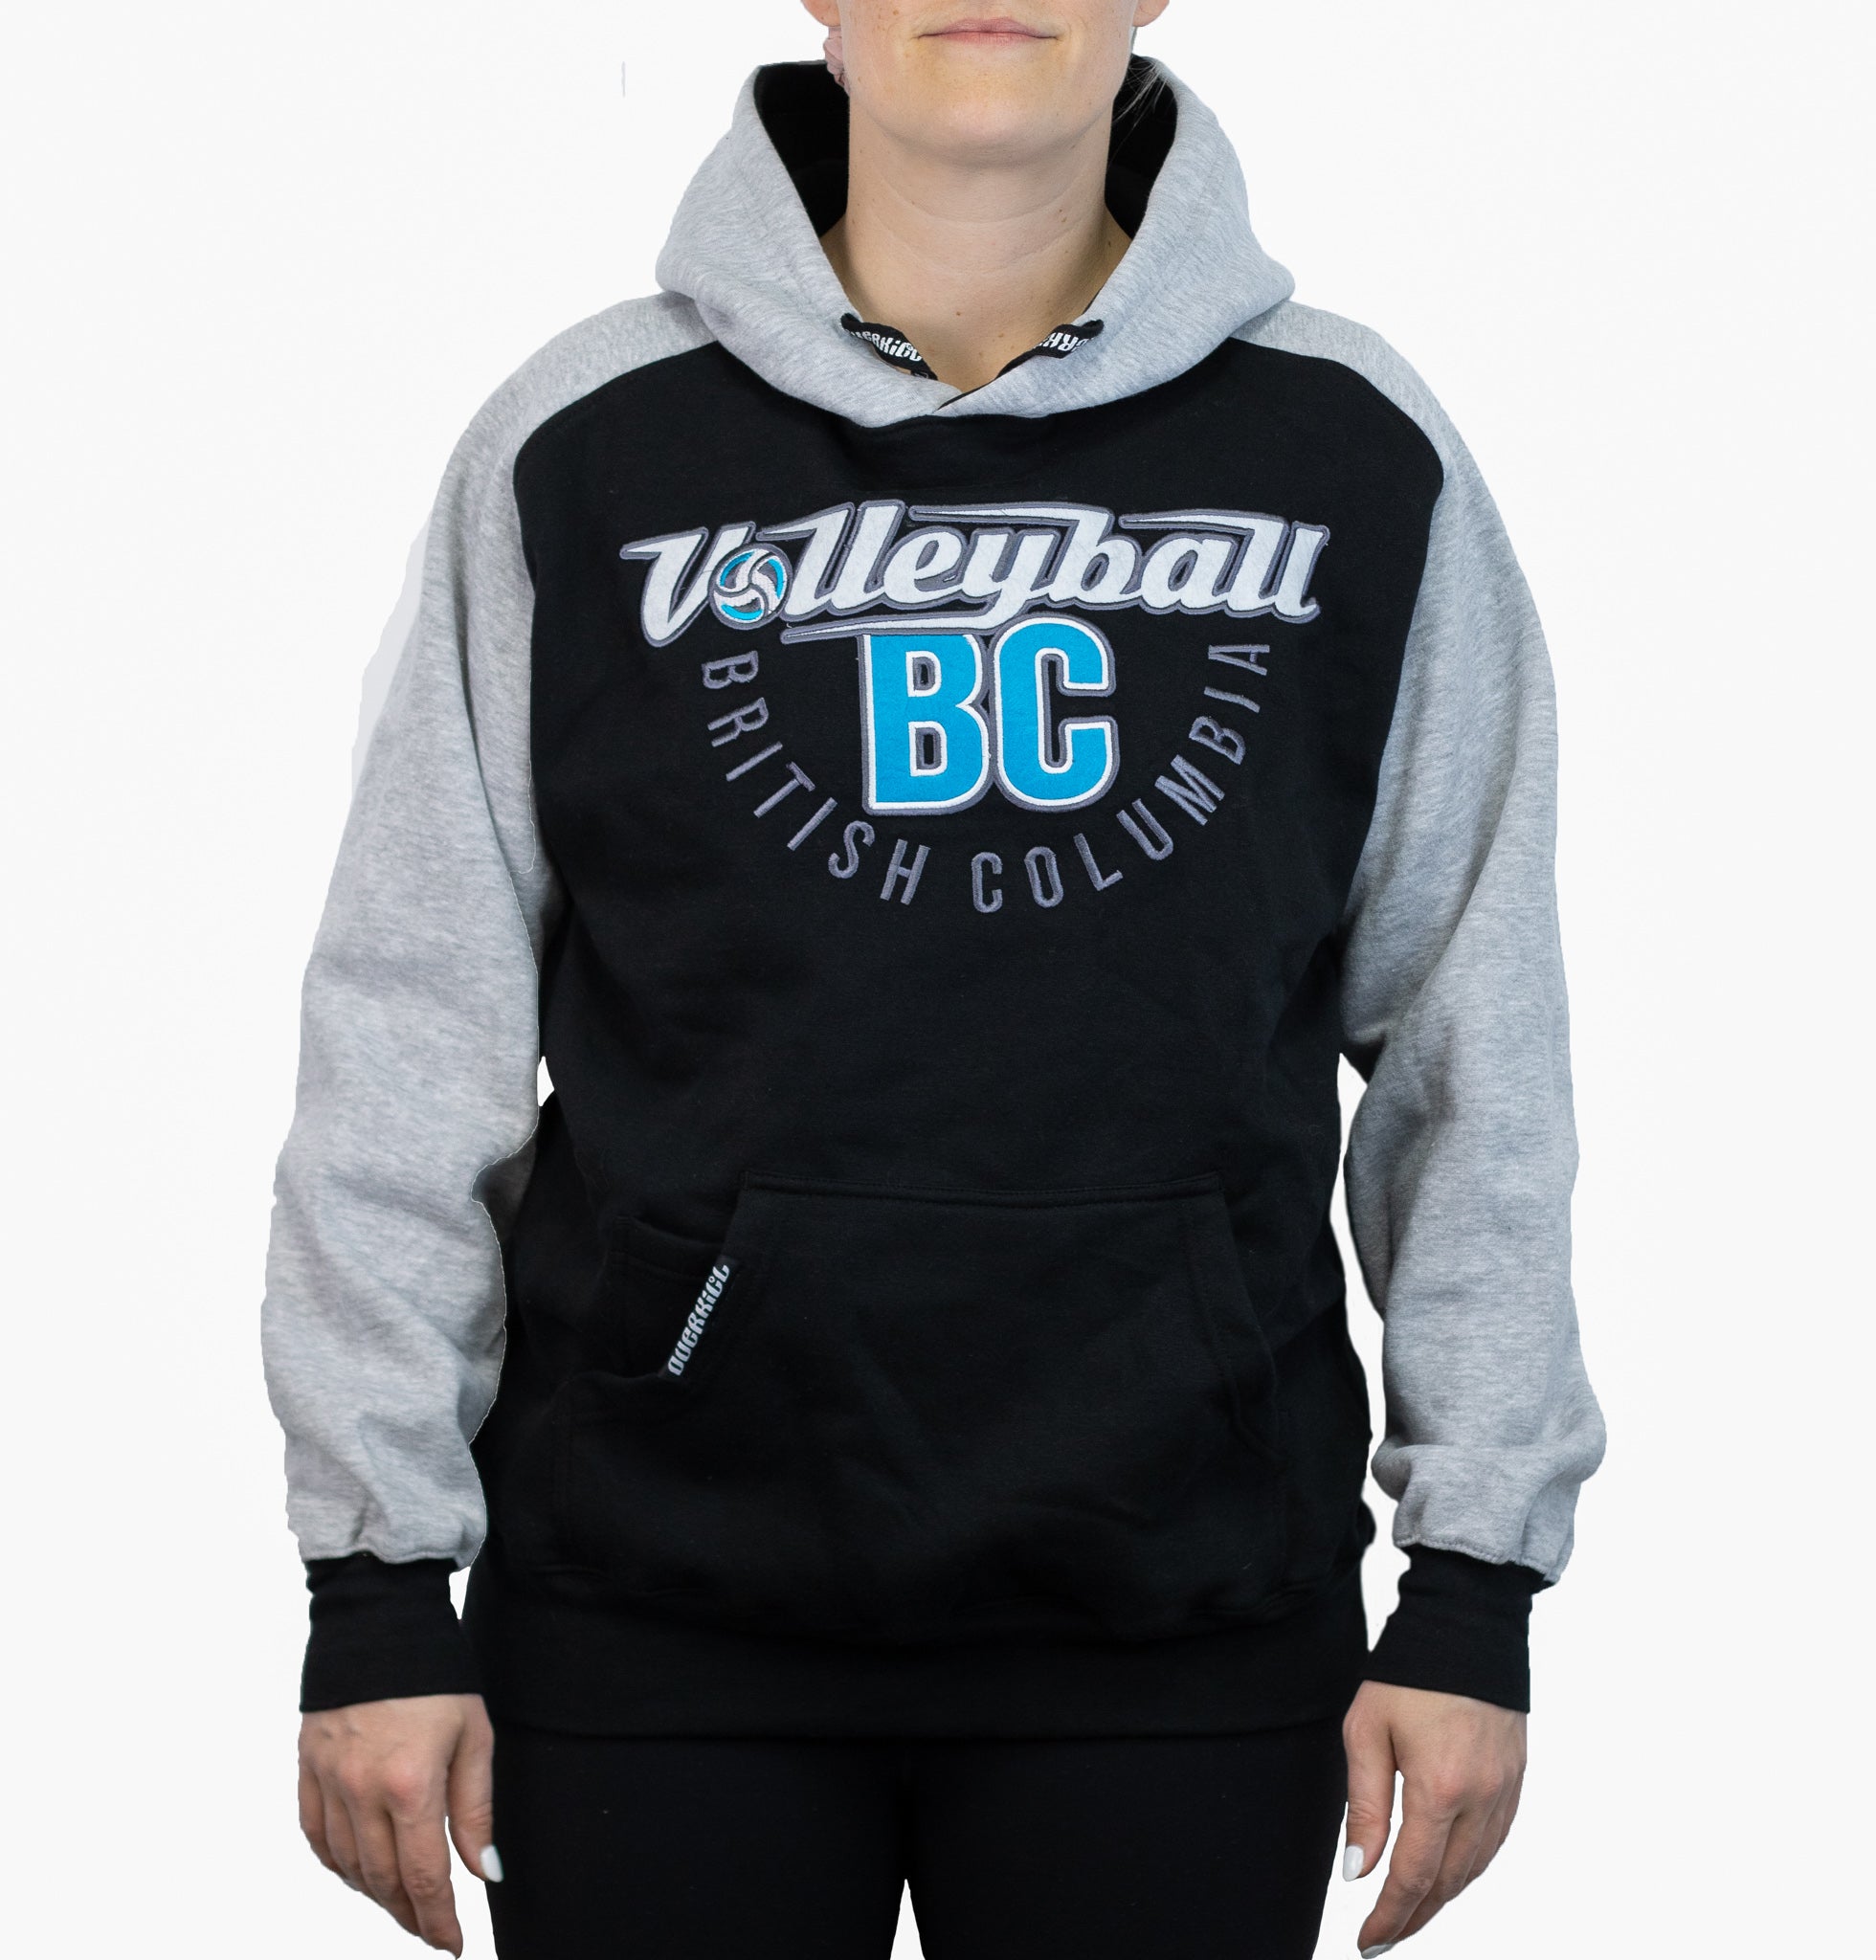 Volleyball BC 2-Toned Twill Hoodie